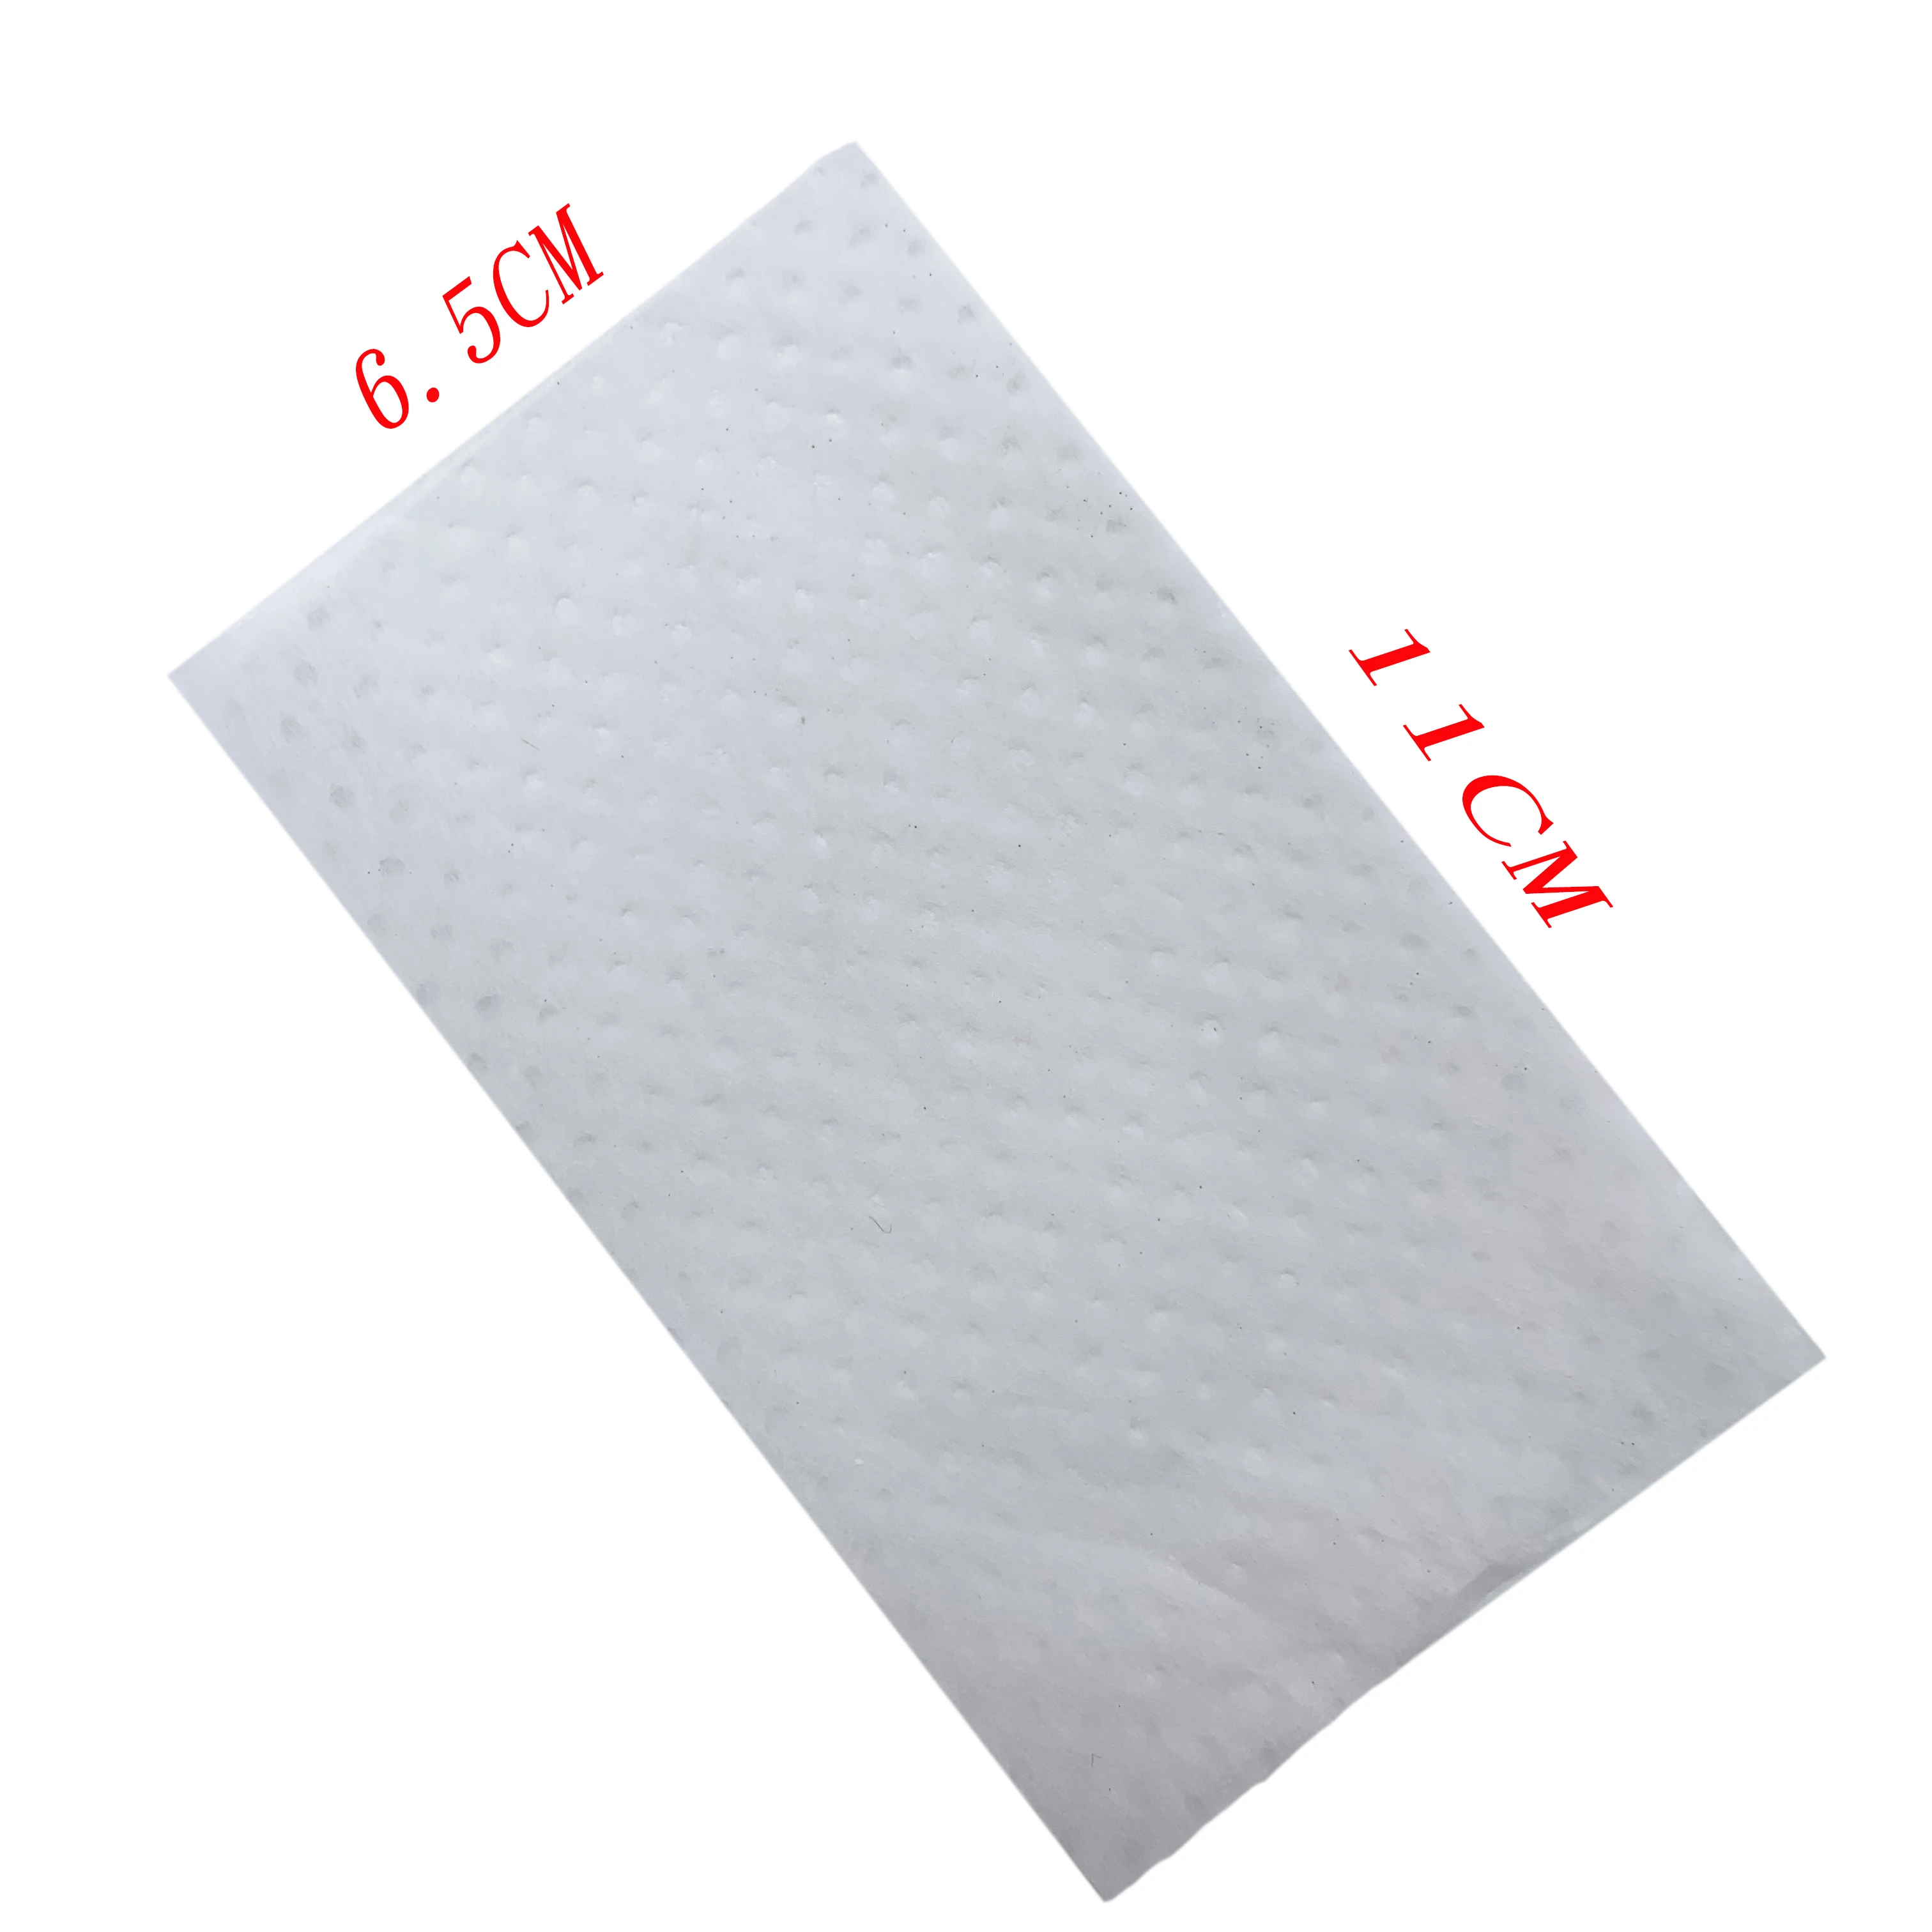 1000Pcs Hair Perm Paper, Ultra-Thin Mesh Breathable Perming Paper Hairdressing Tool Professional Perm for Color Treated 11*6.5cm